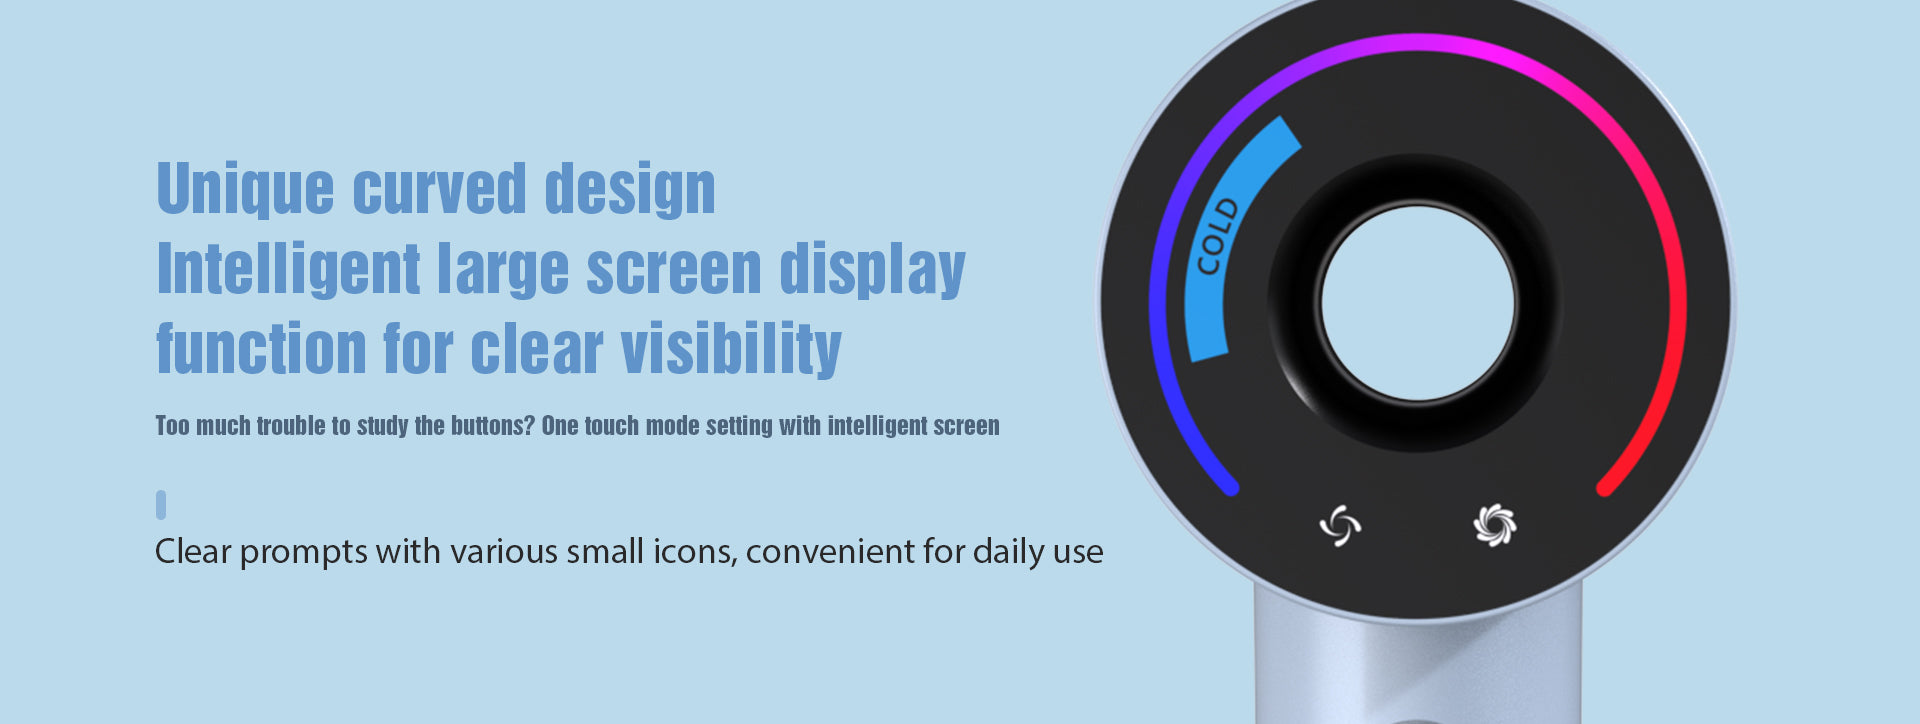 Unique_curved_designIntelligent_large_screen_display_function_for_clear_visibility